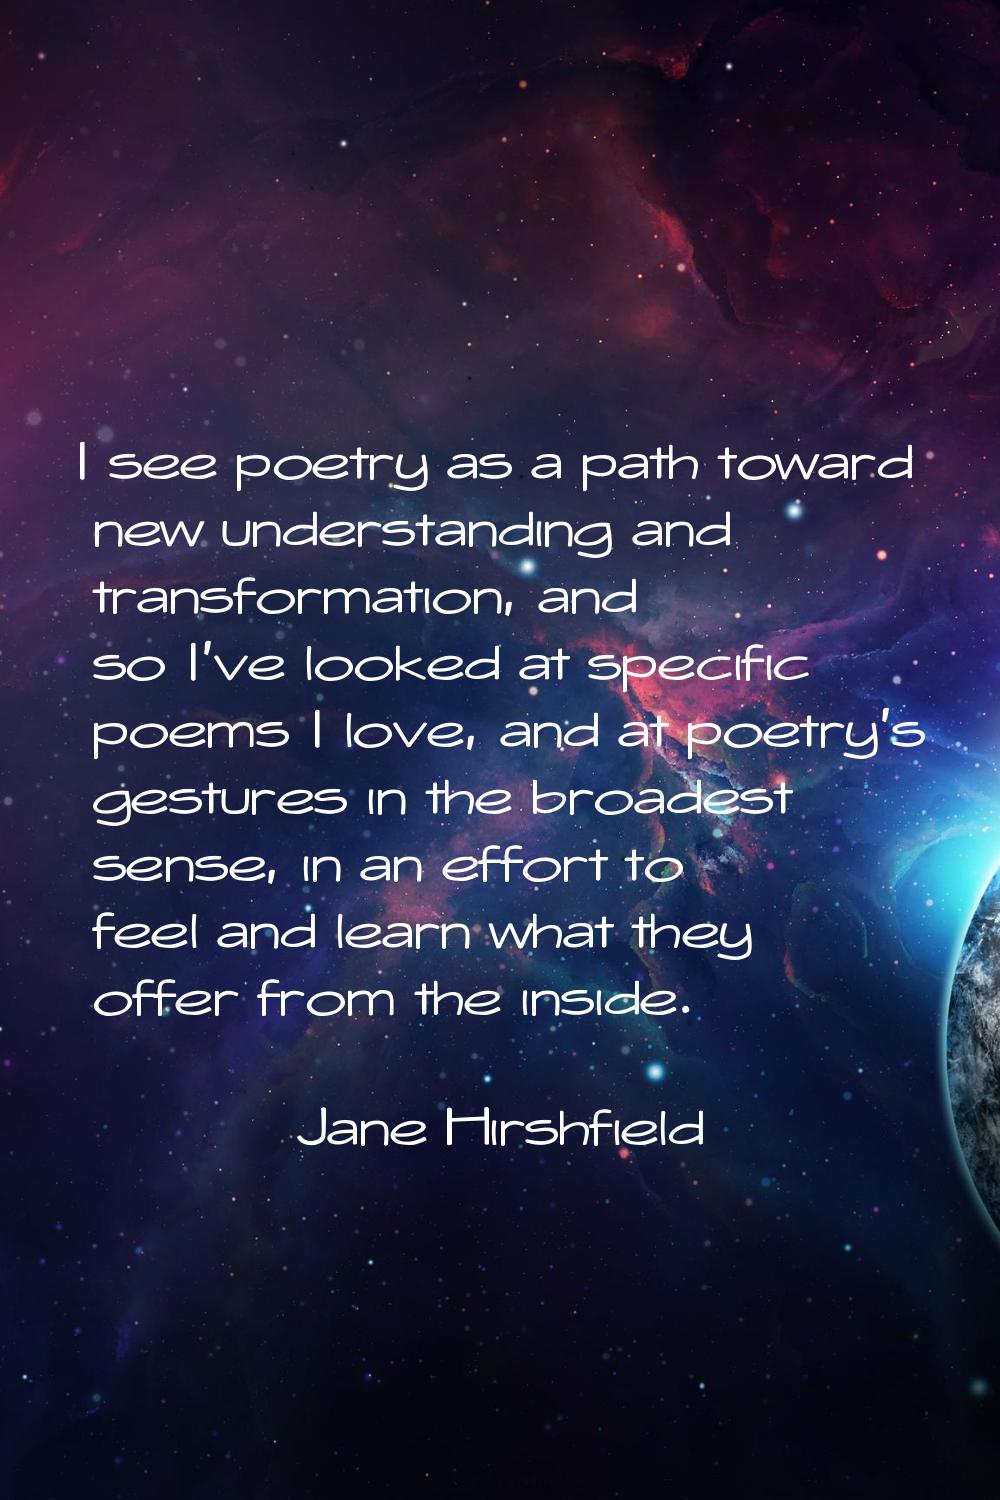 I see poetry as a path toward new understanding and transformation, and so I've looked at specific 